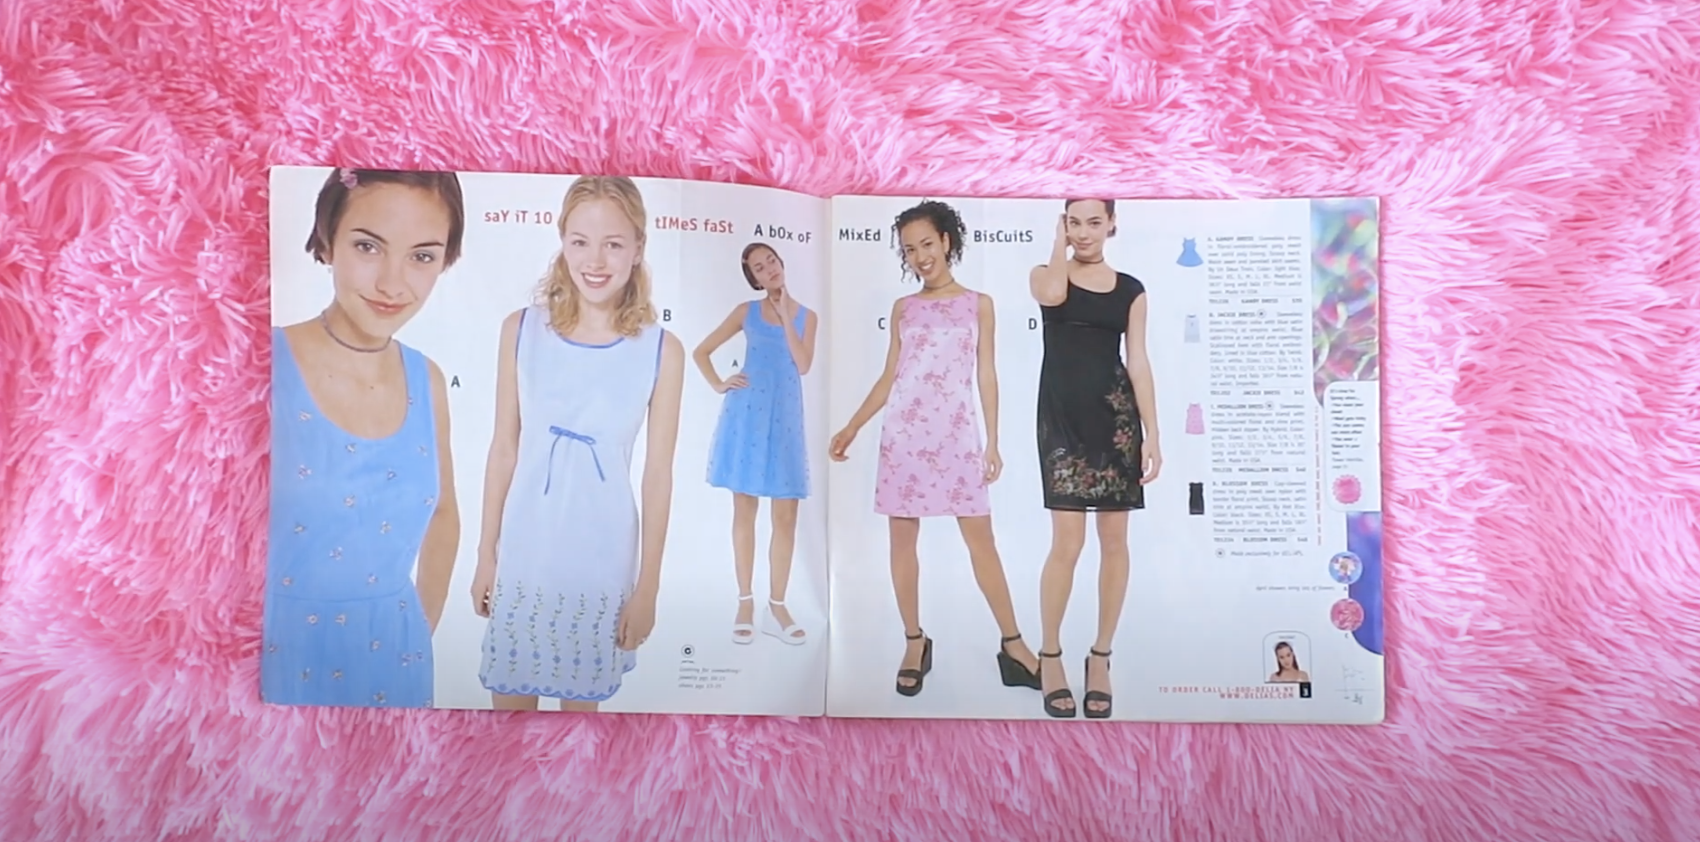 Delia&#x27;s catalog open to a spread showing young women in short dresses